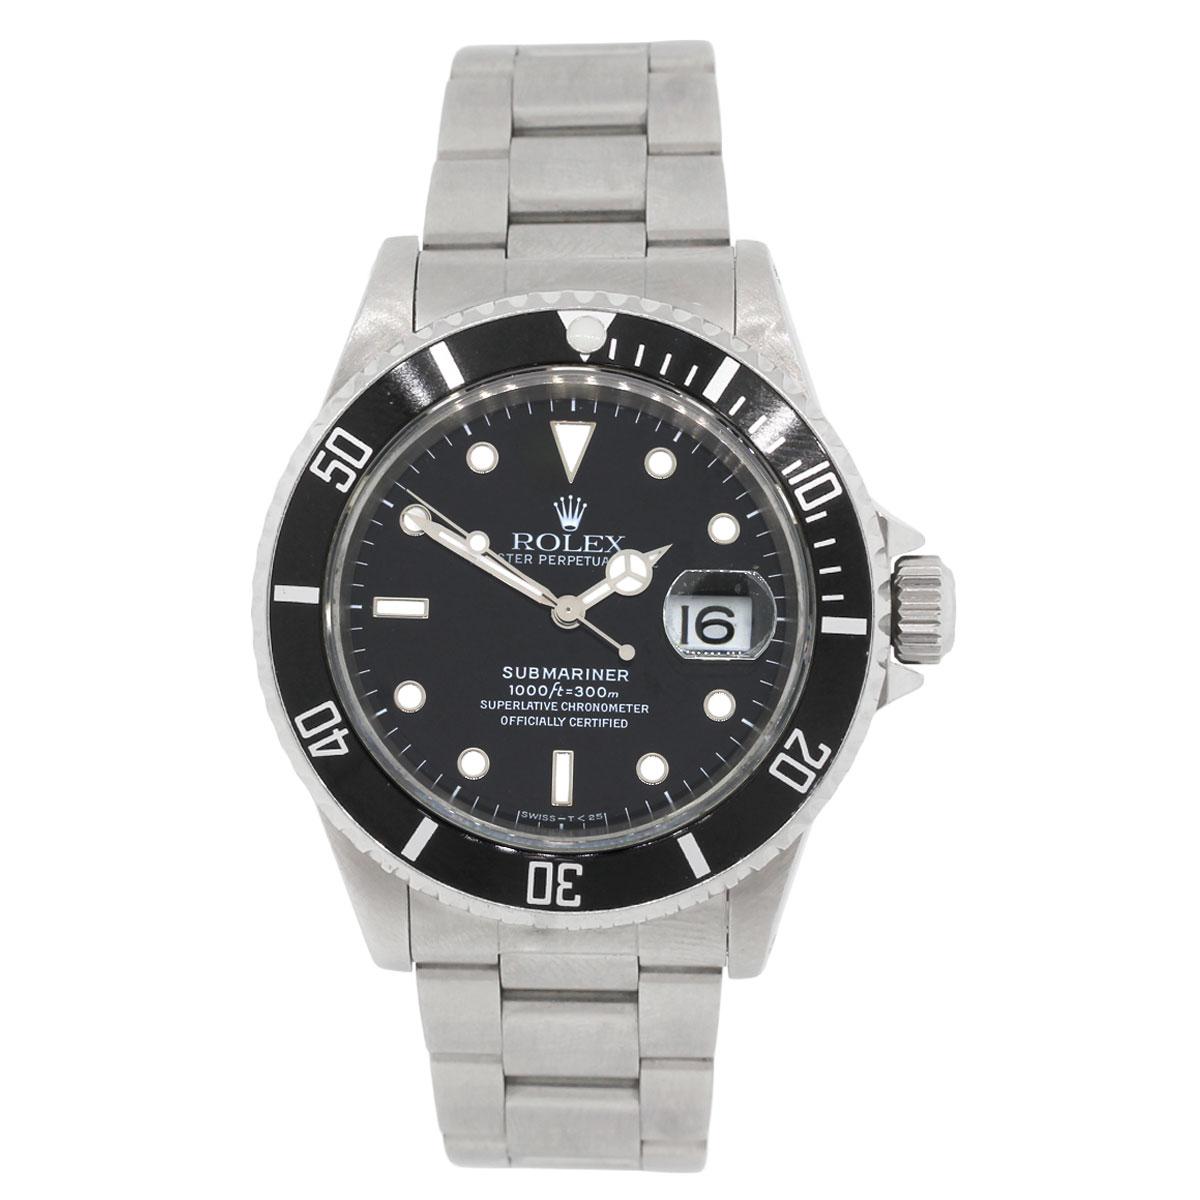 Brand: Rolex
MPN: 16610
Model: Submariner
Case Material: Stainless steel
Case Diameter: 40mm
Crystal: Scratch resistant sapphire
Bezel: Unidirectional black bezel
Dial:	Black dial with date window at the 3 o’clock position
Bracelet: Stainless steel